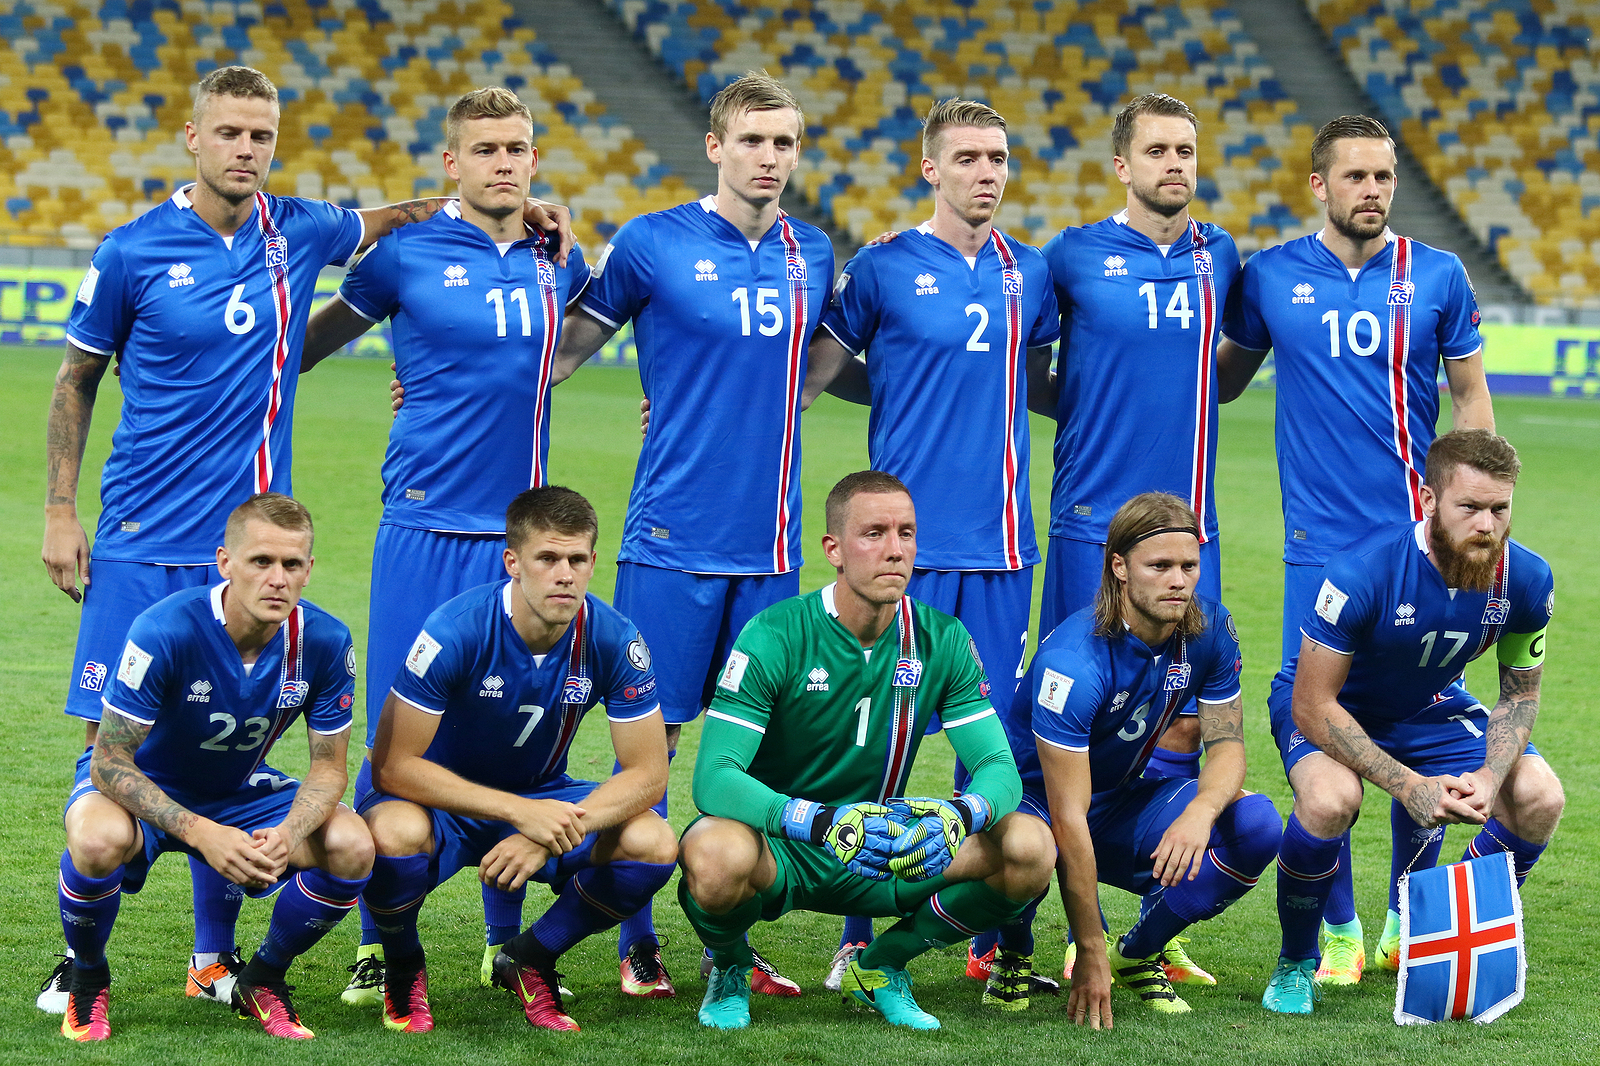 Players of the Iceland National Football team pose for a group photo before their qualifying match against Ukraine for FIFA World Cup 2018.